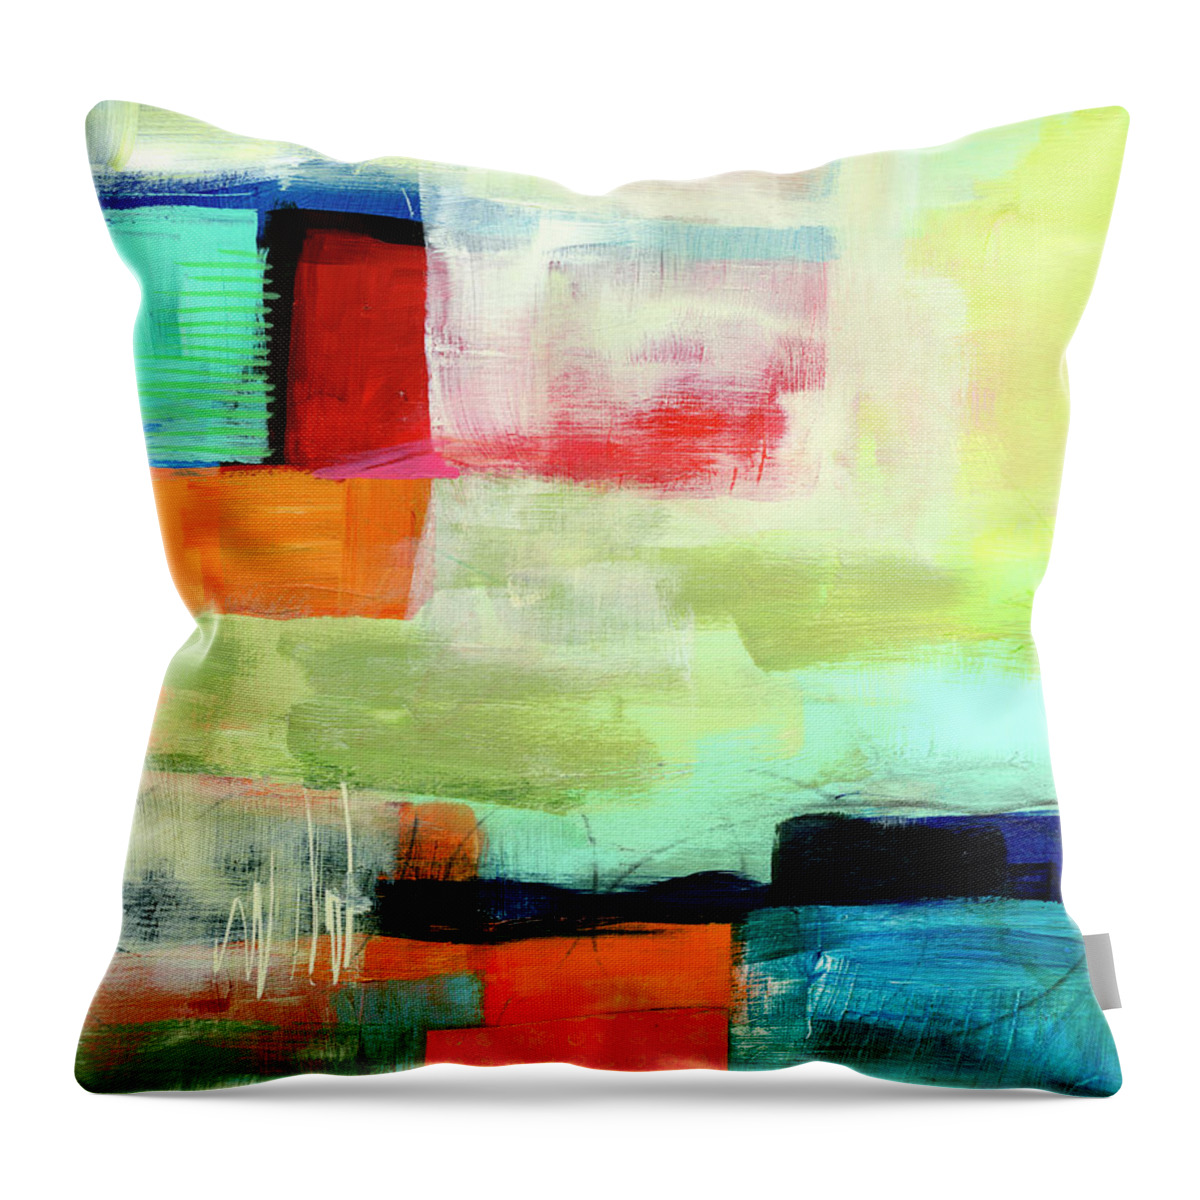 Abstract Art Throw Pillow featuring the painting Shoreline #11 by Jane Davies